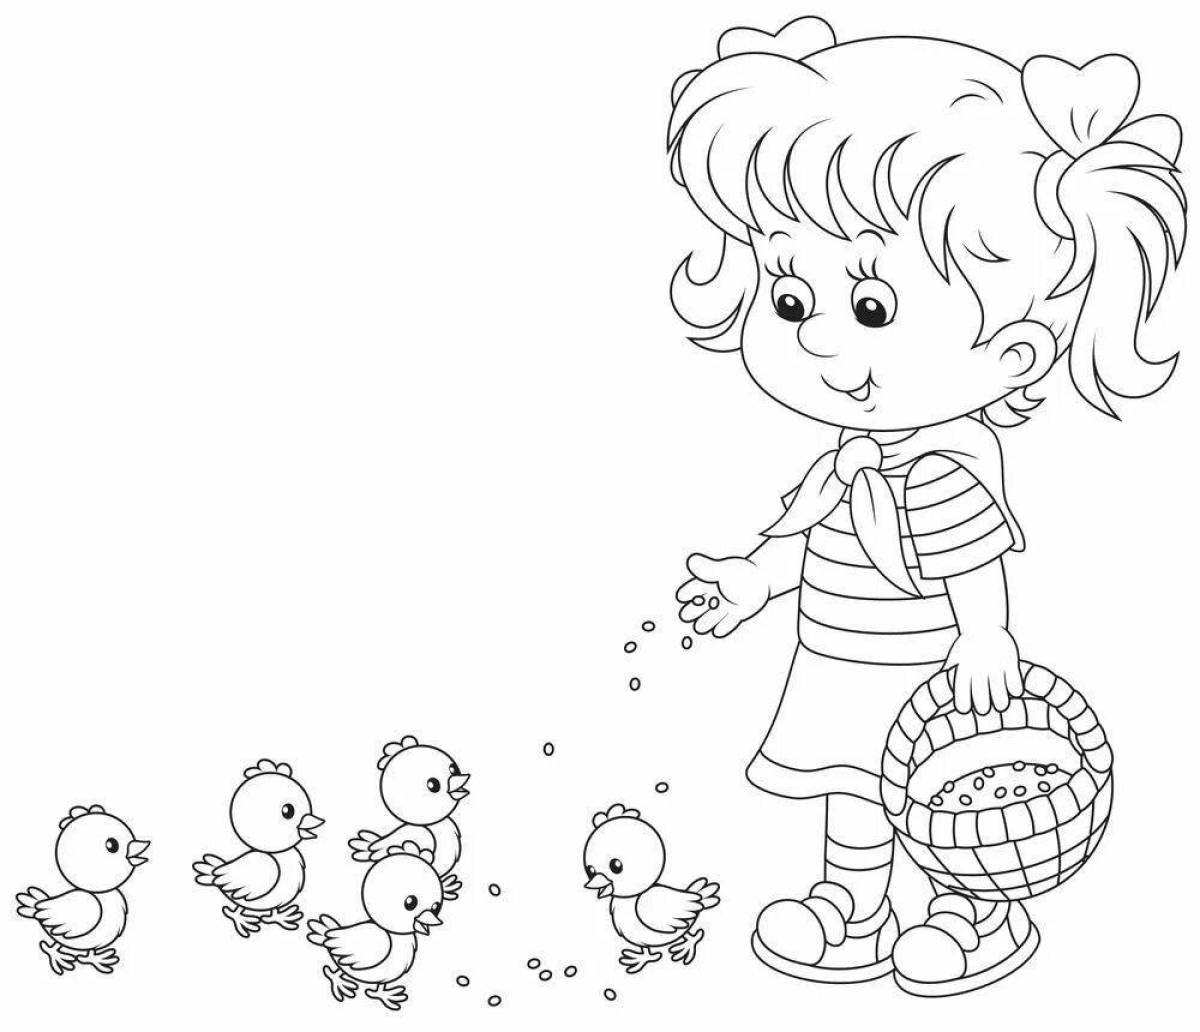 Coloring page glowing boy feeding pigeons